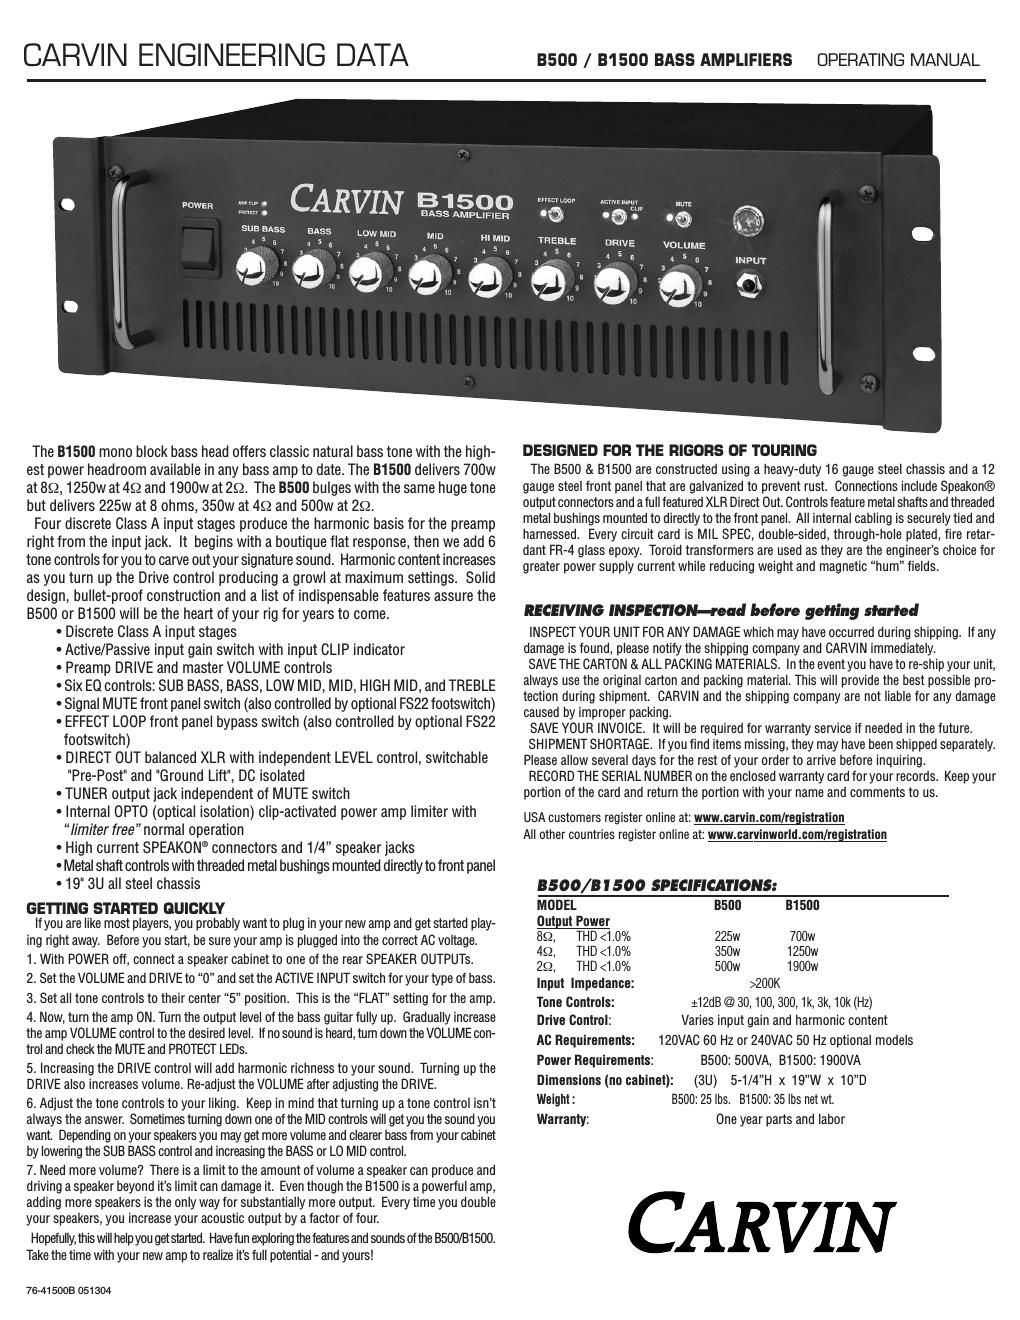 carvin b 1500 owners manual